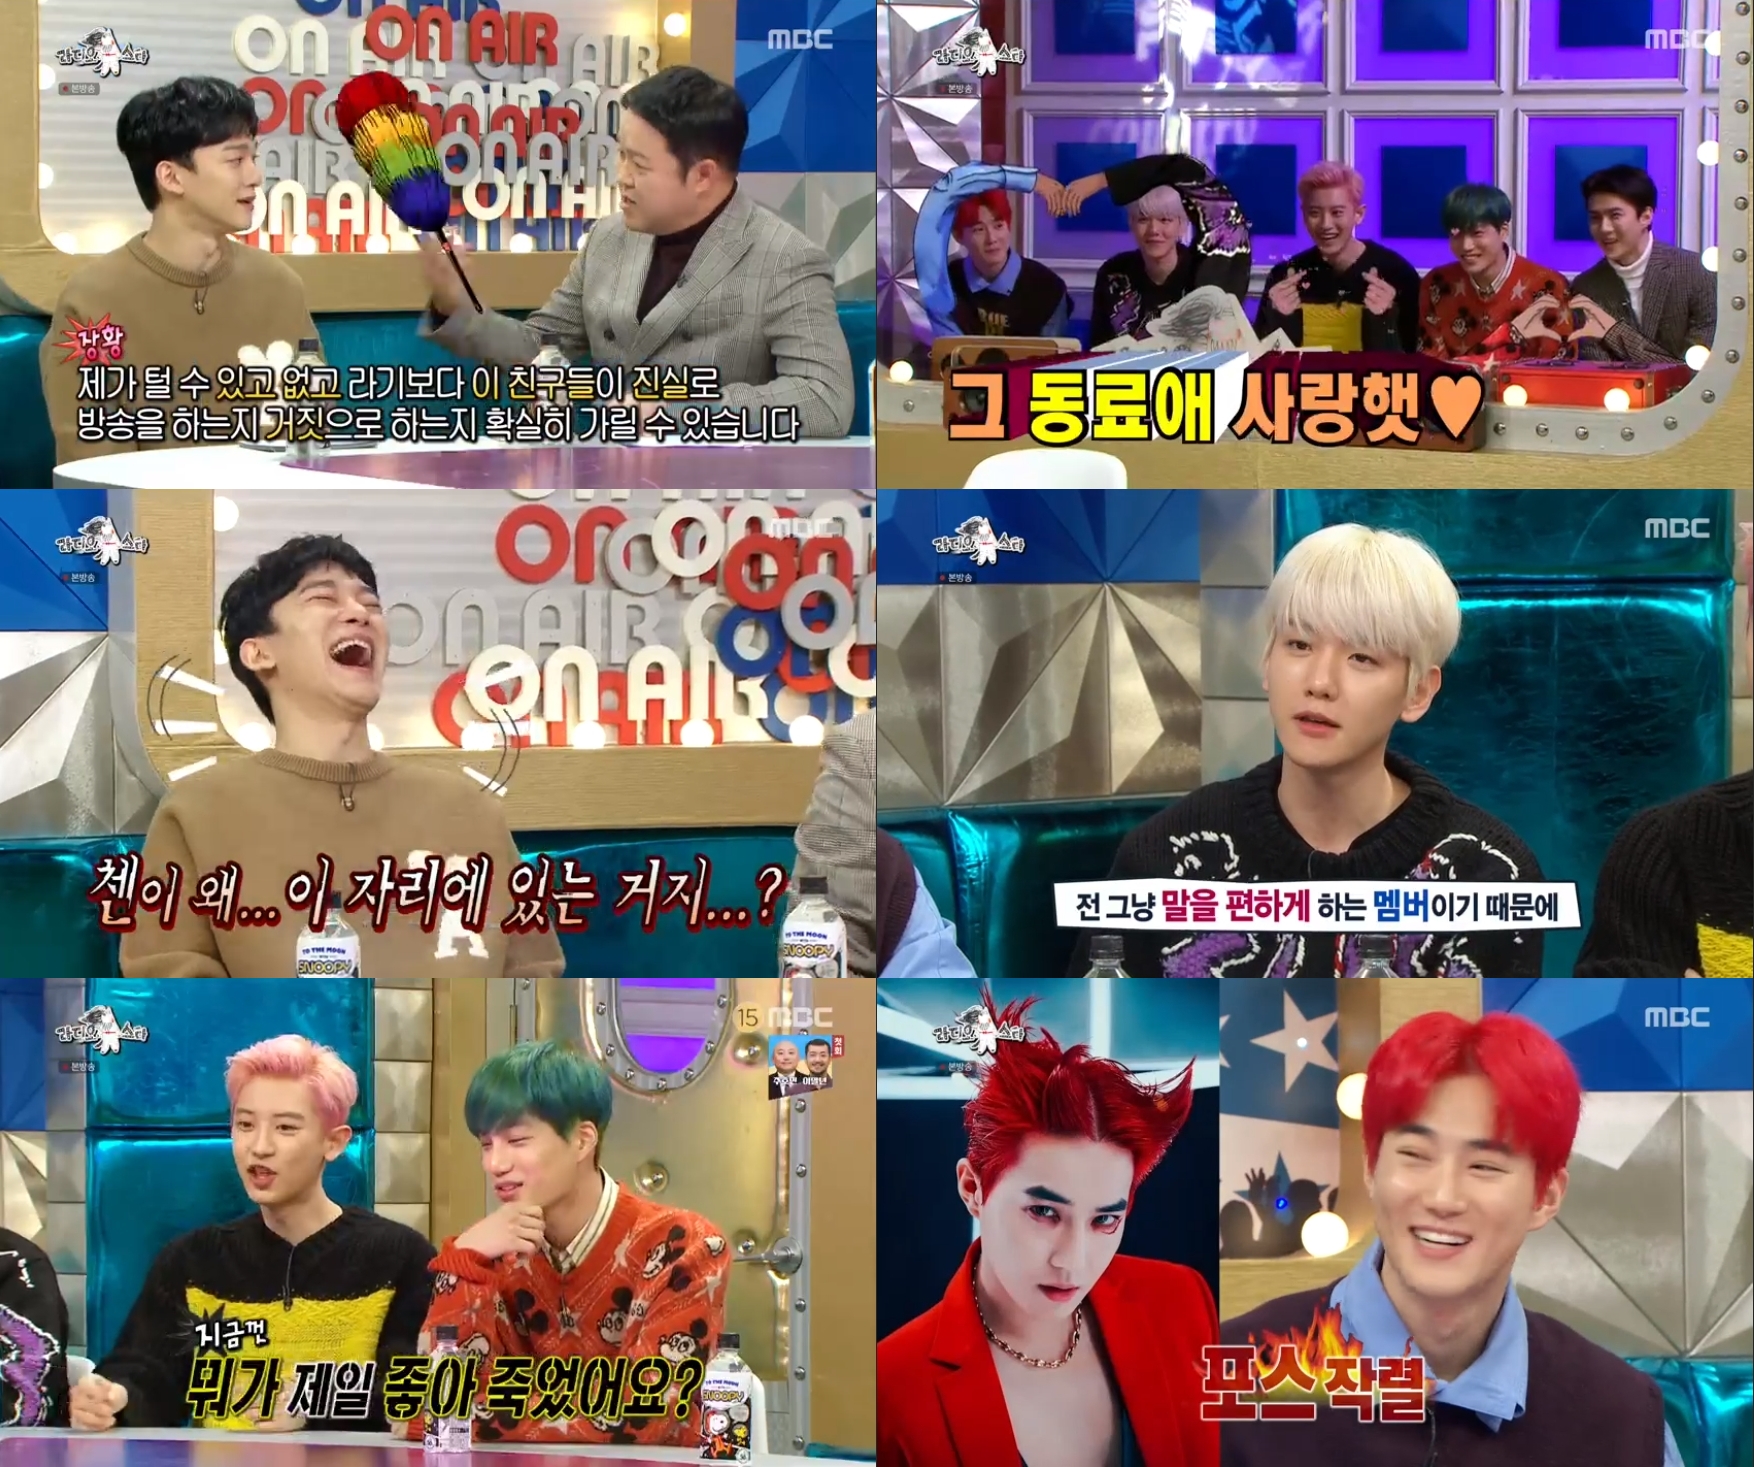 Radio Star special feature EXOcleRadio Star was released.EXO appeared in MBC entertainment program Radio Star broadcasted on the 4th.Chen was present as the special MC on the day; as guests, EXO leader Suho and Baekhyun, Chanyeol, Kai and youngest Sehun were also present.EXO presented 4MC with a regular 6th album and announced the comeback.Suho then revealed his abs at the request of Kim Kook-jin. Baekhyun said, Its been less than five minutes since I came in.While embarrassing, Chanyeol raised Suhos clothes directly, saying, Originally, this is more of a person than he does. Suho opened the door to talk, revealing her abs in a hot snap.Baekhyuns vocal simulated personal period and Kais human top personal period were revealed.Kai said, I did ballet when I was a child, and turned eight laps in succession and jumped, showing a personal period of two and a half laps. Im actually surprised to go somewhere else.But the reaction here is not cool, he said, embarrassed by the MCs dry reaction and laughed.On the other hand, Chanyeol was curious about the statement that Chens performance as a special MC was not expected at all.When Chanyeol said, Chen is so nice and serious that he will not be attacked by the members on the contrary, Suho said, Chen is almost a hostess here.Sehun said, Suho is interested in entertainment. Suho revealed that he was greedy for Chens place. Then the MCs said, Did you feel sad?, and asked Suho, I thought it was mismarked; why is Chen here, Model Behavior? and laughed.Since then, EXO members have introduced the concept of the regular 6th album.When EXO explained the concept of fighting good EXO and Billon EXO, Gim Gu-ra pointed out that Lets try the Billon version today and laughed.Kai laughed, saying, When we made our debut, the members had one superpower, and there is something really strange.Kai said: Its a request for a regular repertoire to show superpowers.But it was hard to show what I did not have, he said. After five years, I understood the big meaning of the company and Isuman.Meanwhile, news of Suho and Baekhyun, the current top earners of EXO, said Suho: This is within EXO. They tell each other that they make a lot of money. Why?I have to buy a lot of people.Suho added: Baekhyun has actually come up with statistics: 500,000 solo album sales.As my source of income, I laughed at Confessions, saying, I have lived musically and movie hard.In addition, Kai is an ambassador of luxury brands, and Chanyeol has made a personal income from financials.In particular, Chanyeol said, In fact, I became a landlord two months ago. I was very relaxed and put down a lot.EXO members earned as much as they earned well.Chanyeol calculated all the rice prices of EXO and presented an anecdote to all members of the team, and Sehun released an anecdote that sent five coffee cars to Suhos shooting location.Gim Gu-ra, who heard this, admired it, saying, We kill each other a lot of money.Baekhyun, on the other hand, was surprised to say that he had spent only 150,000 won a month on spending, because he was not good at going out and buying something.Nevertheless, the family members were open to the whole wallet, and the Confessions made it warm.Later, Gim Gu-ra asked, What criteria do you pick leaders? because Suho was revealed to be a powerless leader within EXO.Baekhyun said, When I thought about it, I think I became the person who could keep the most neutral.So Kai said, Thats important.When Chanyeol agreed, I went to the house and it was good to play with me, Kai added, I am alive for a long time as a dog.Ahn Young-mi expressed sympathy, saying, Model Behavior, which wants to be more alive, is in that house.